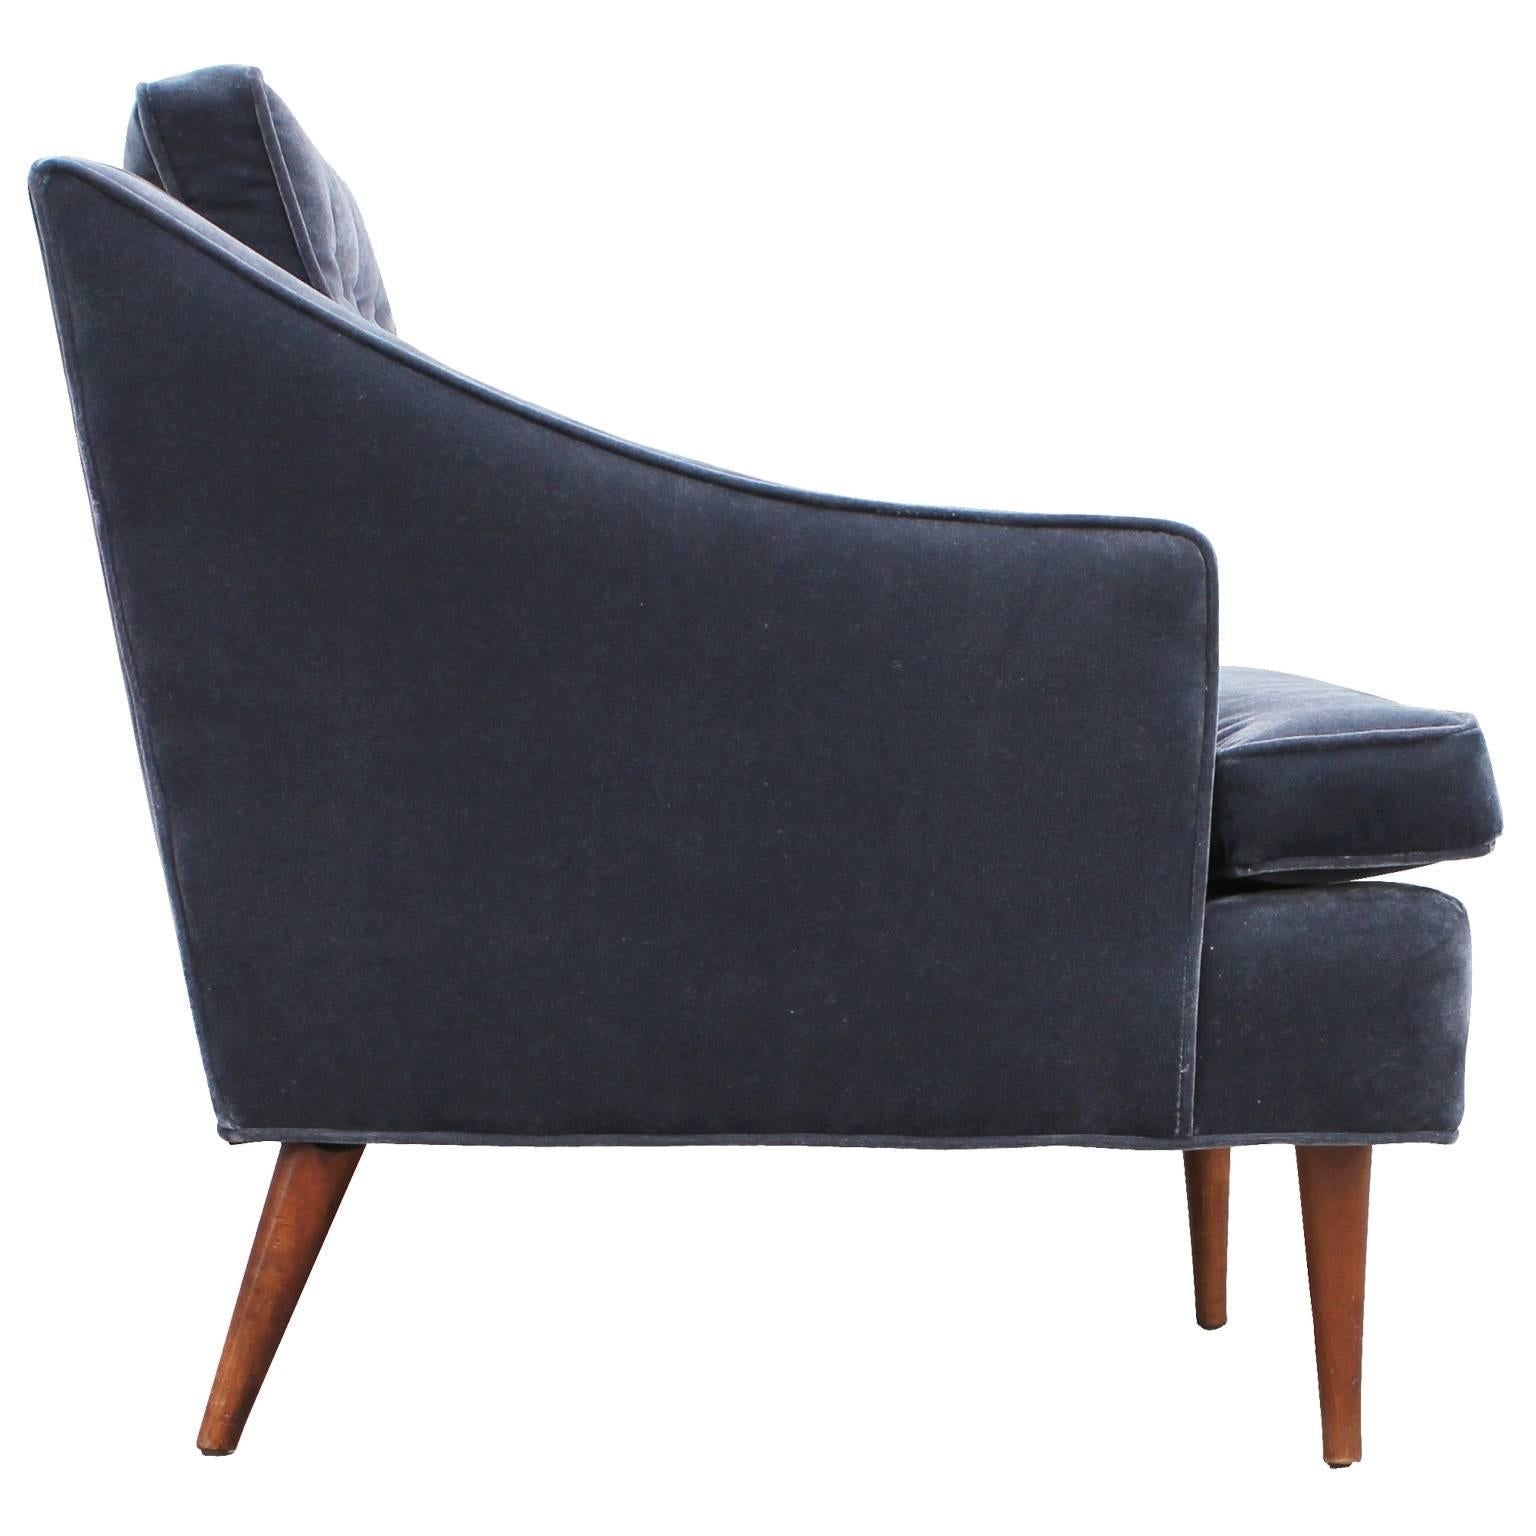 Mid-20th Century Wonderful Pair of Curved Grey Velvet Tufted Lounge Chairs